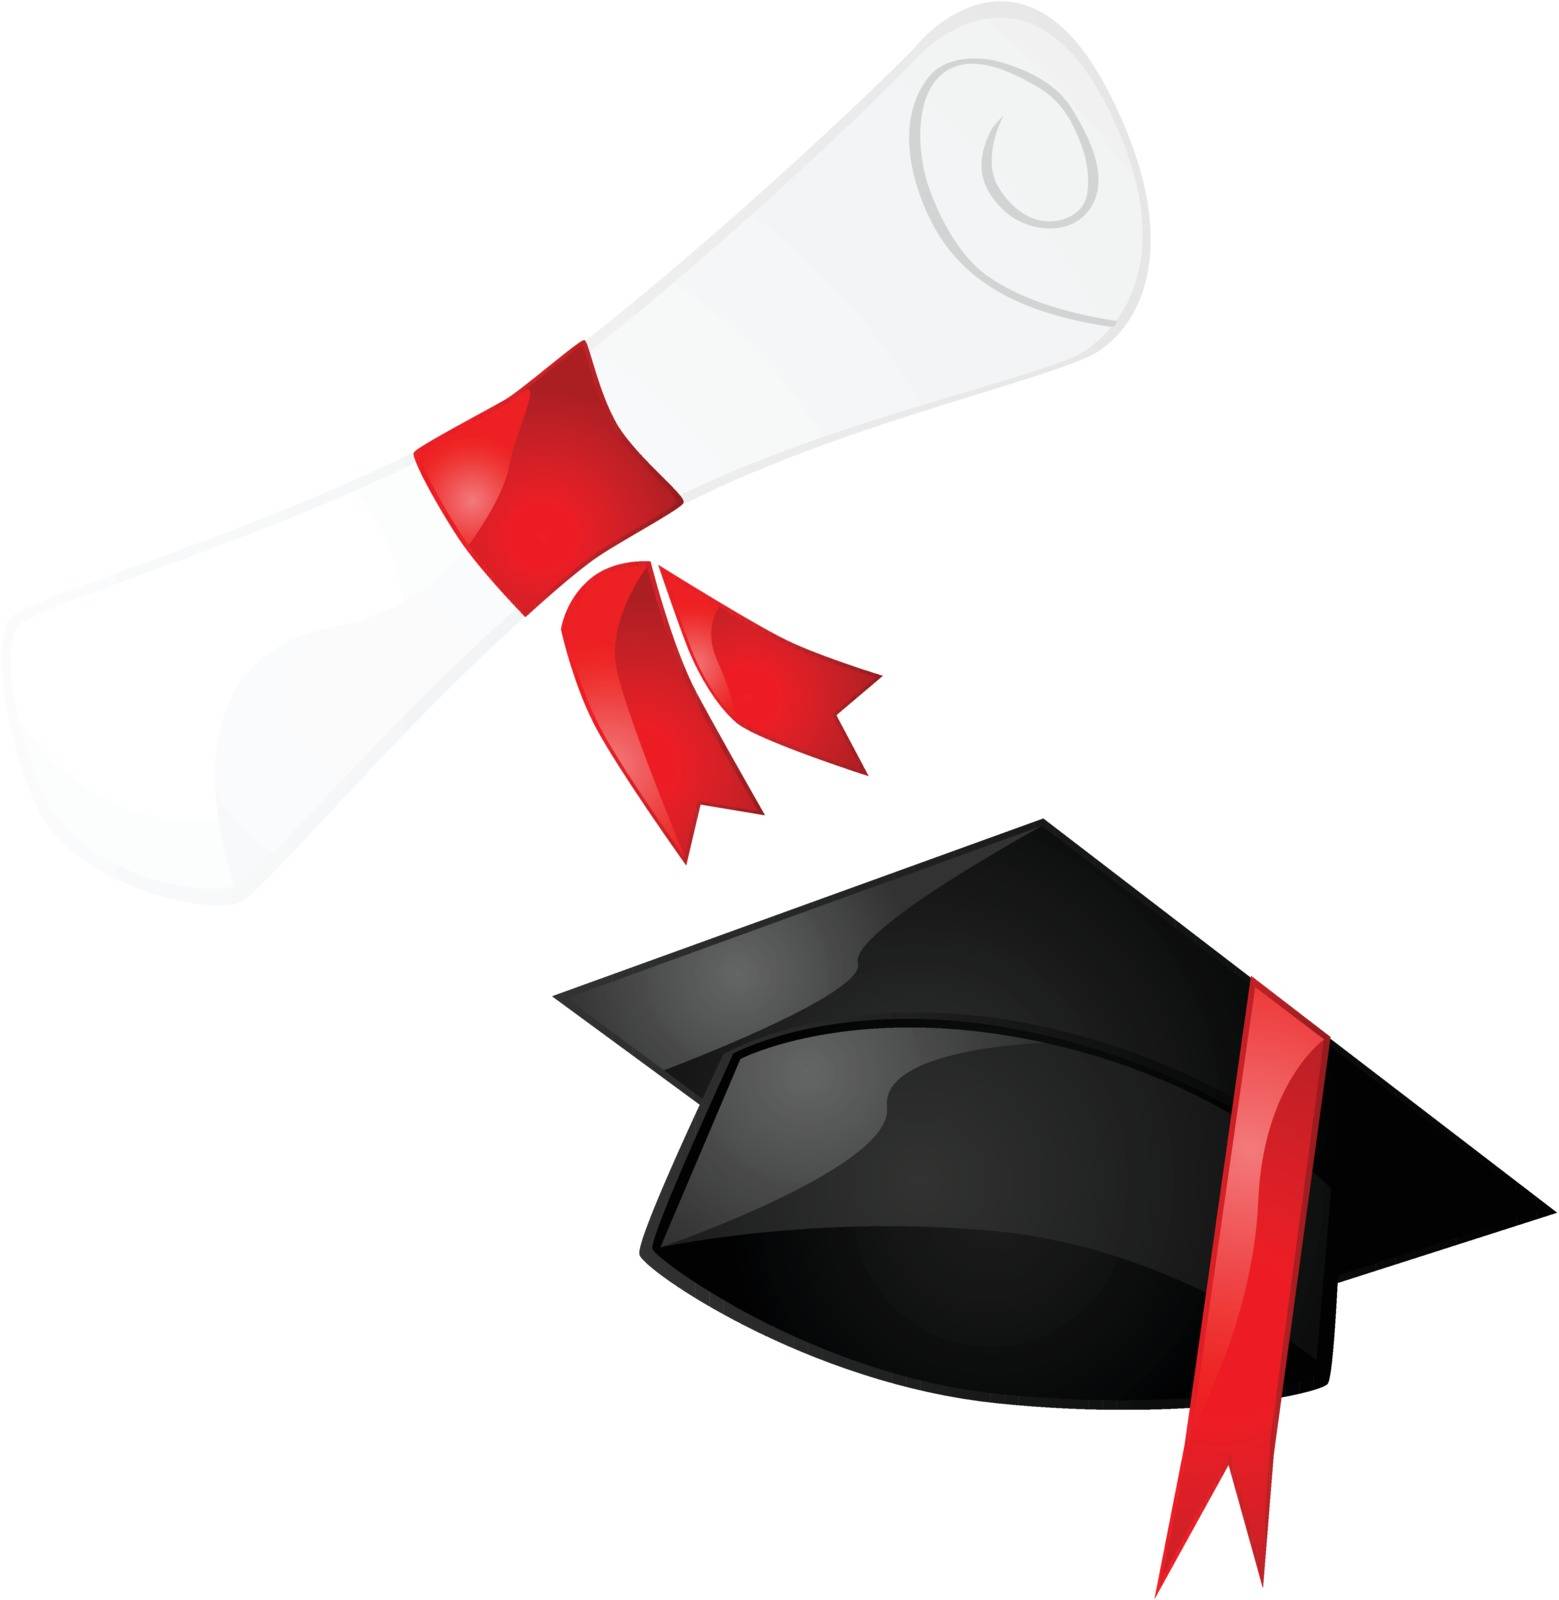 Glossy illustration of a diploma and a graduation hat